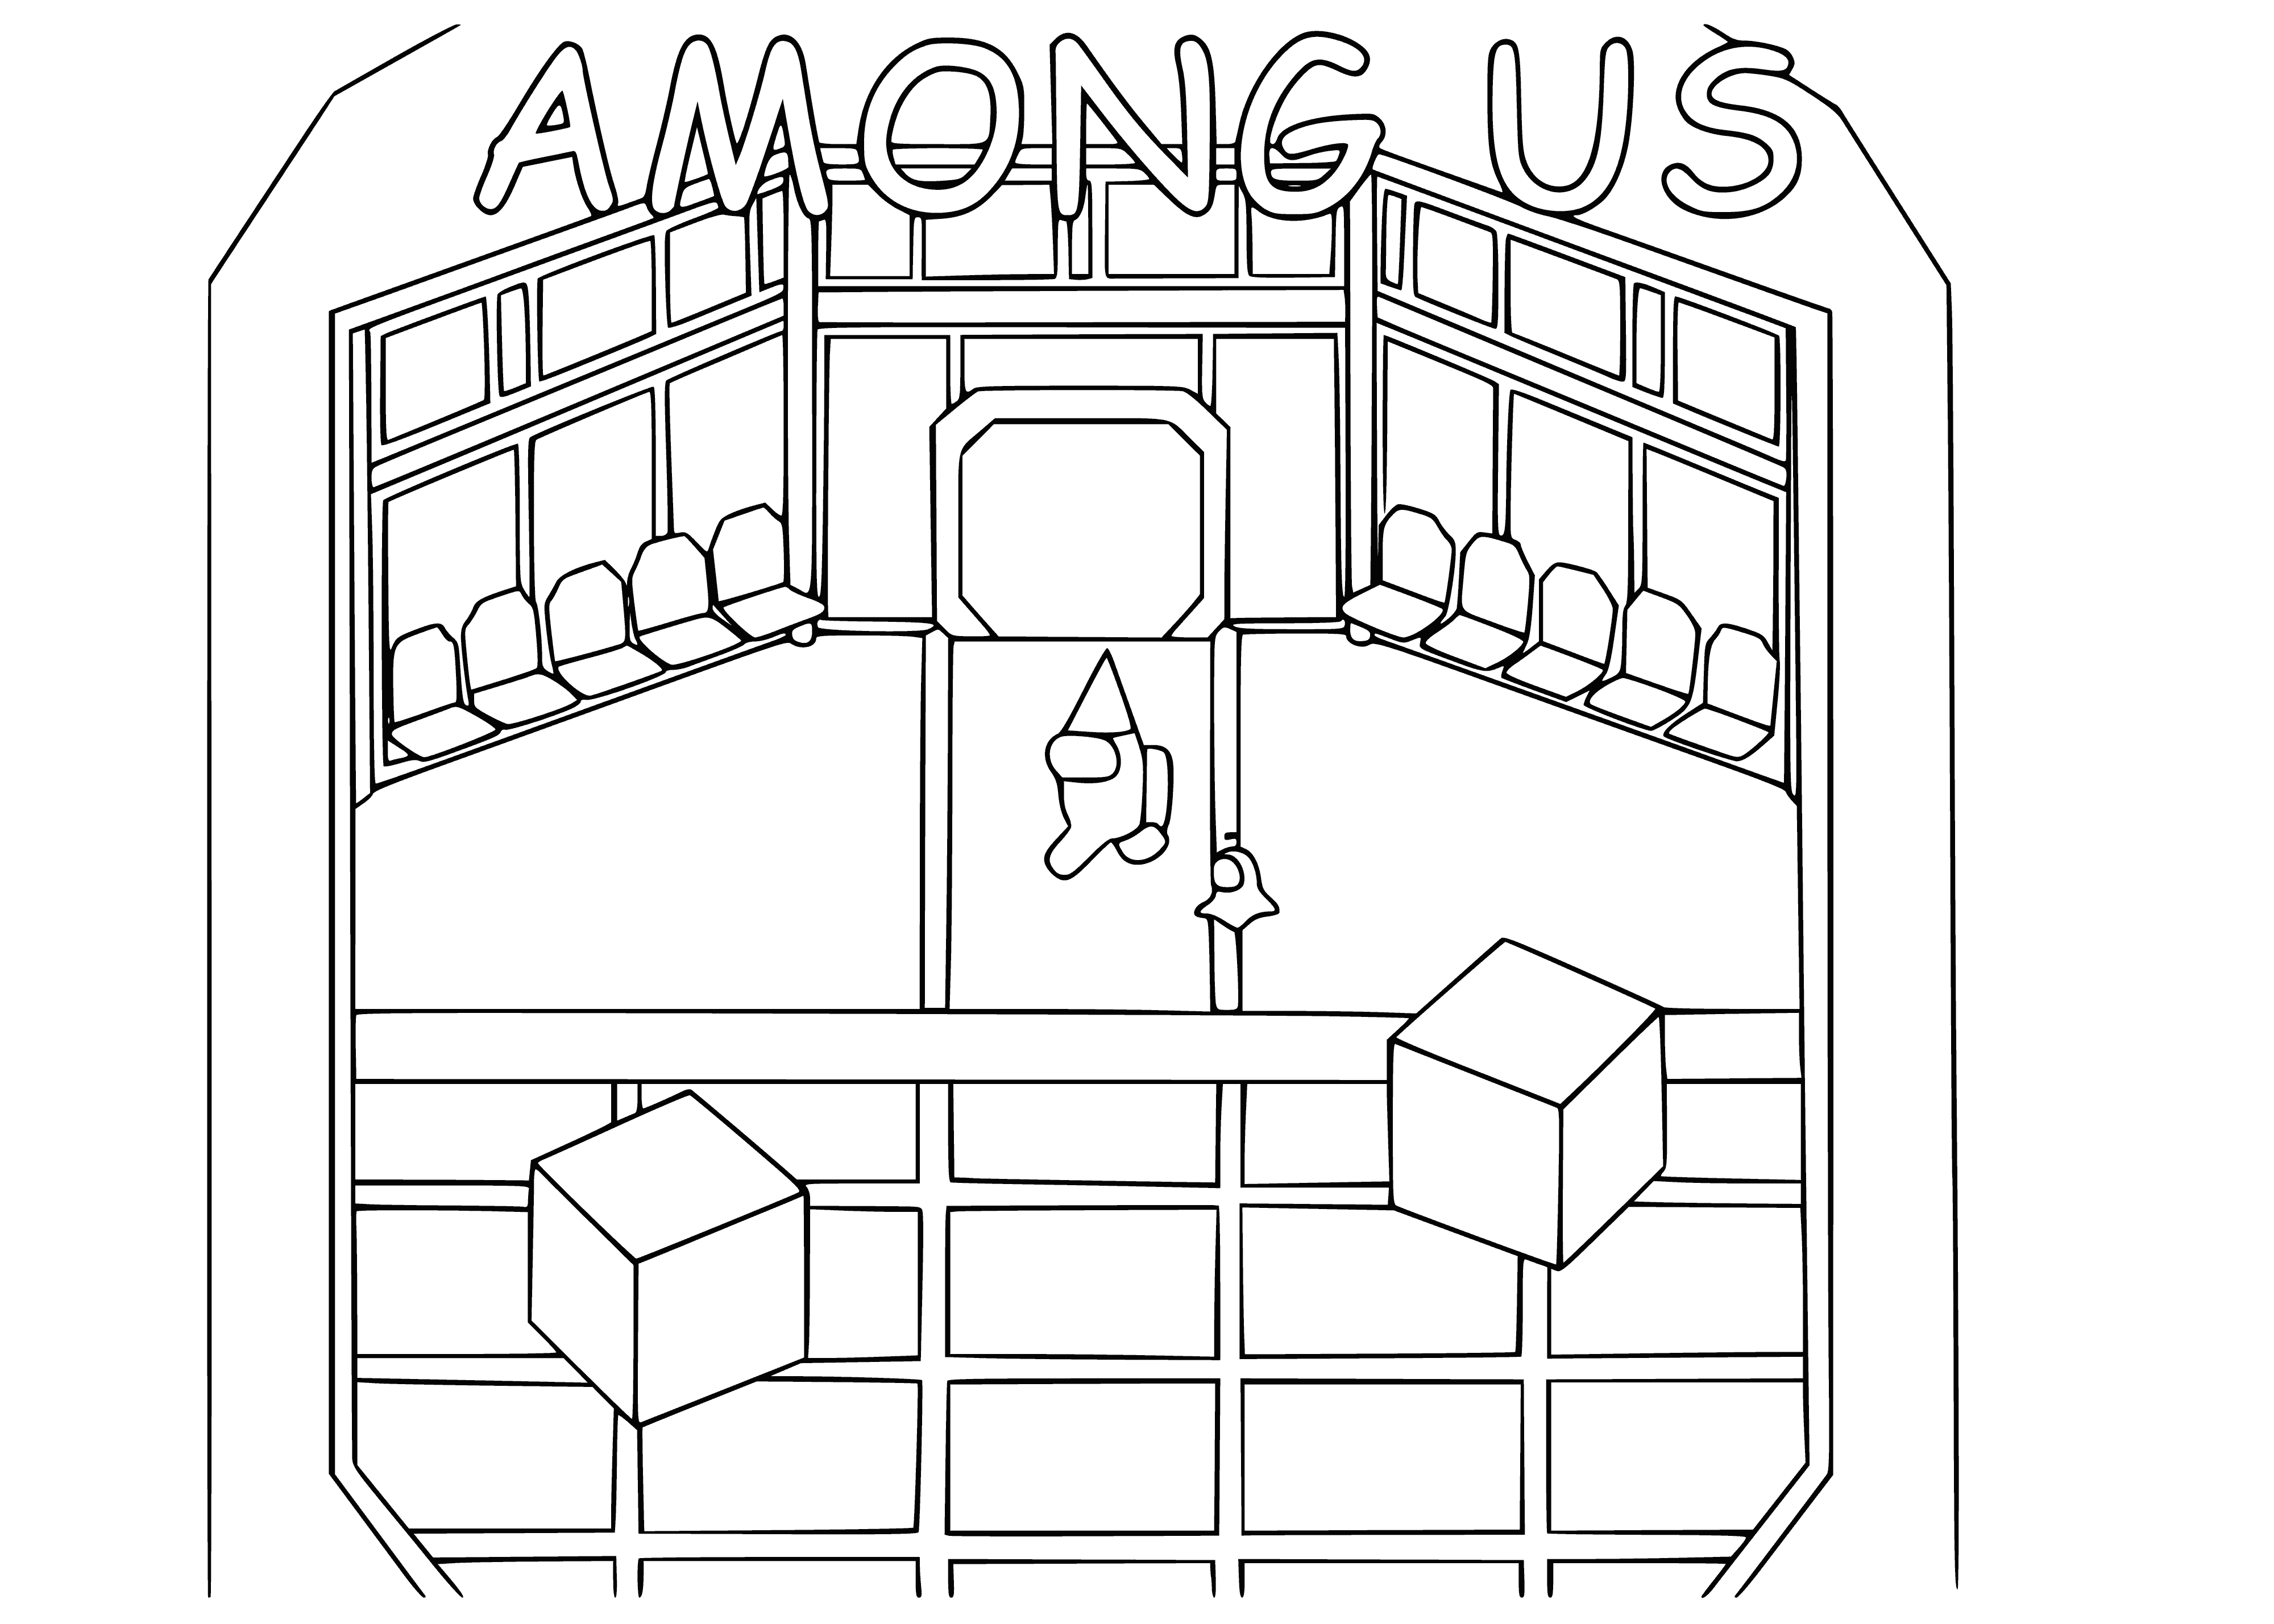 coloring page: Nine gather round table, 8 pink & 1 purple. Light & cake in middle; purple letters spell "amon gAs".